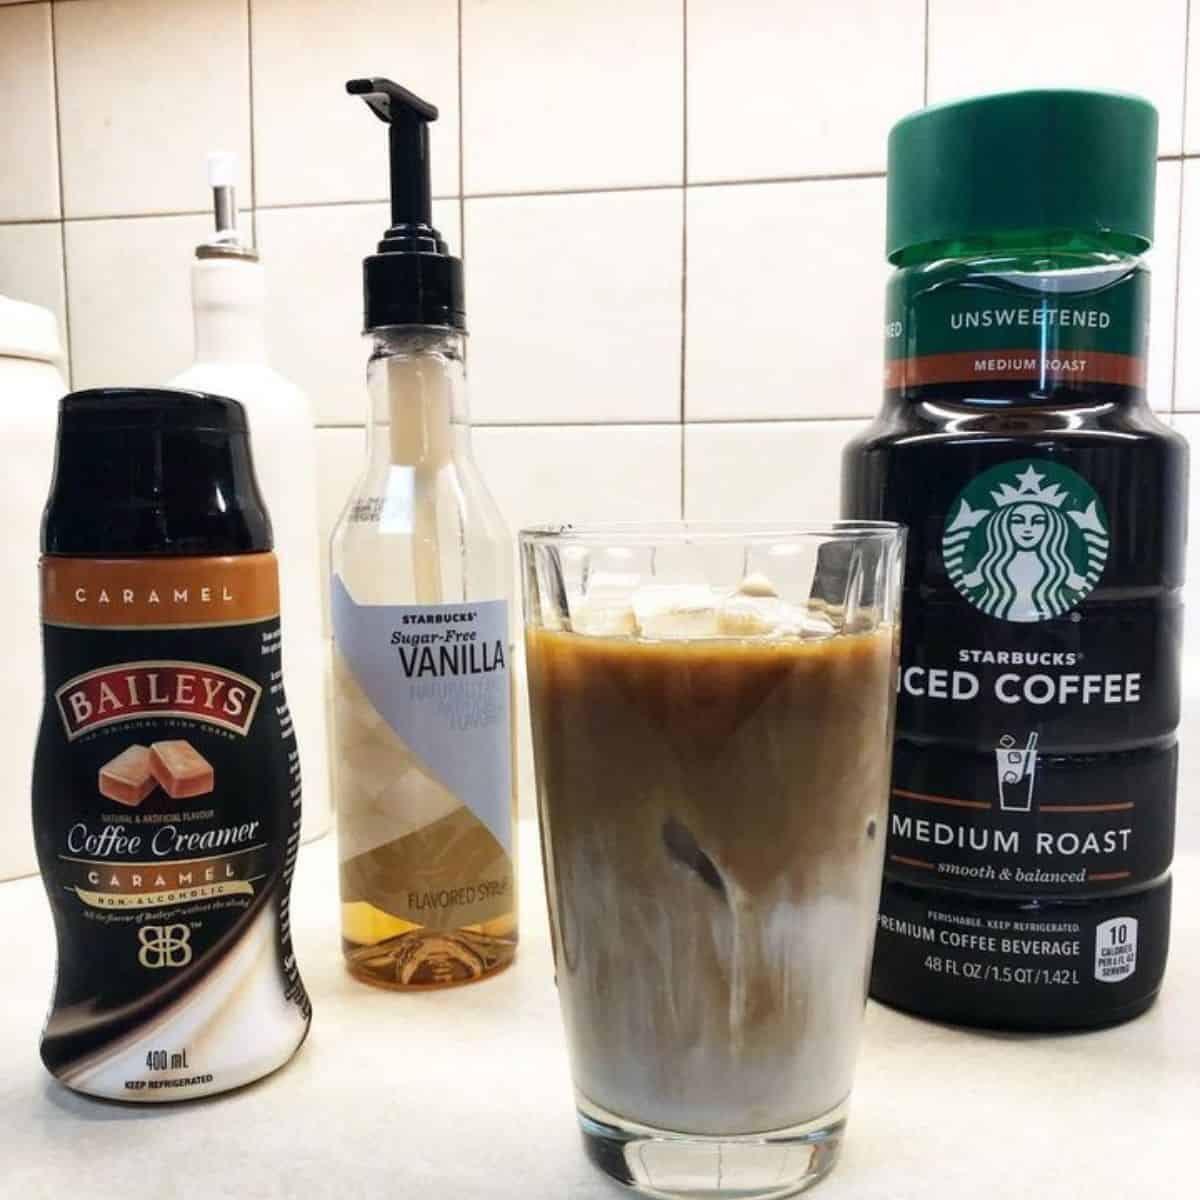 Iced coffee with sugar free vanilla syrup and other ingredients on display